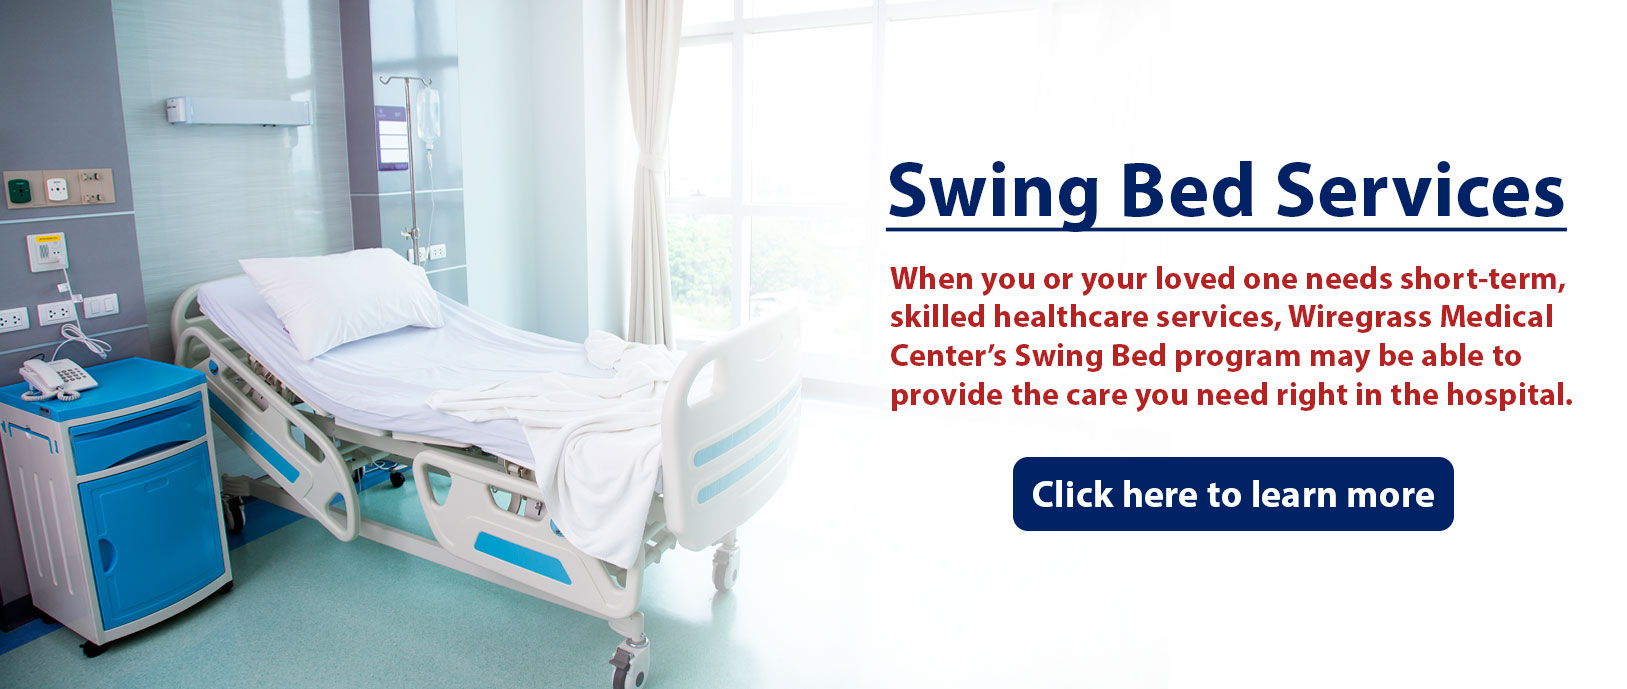 Swing Bed Services

When you or your loved one needs short-term, skilled healthcare services, Wiregrass Medical Centerâ€™s Swing Bed program may be able to provide the care you need right in the hospital.